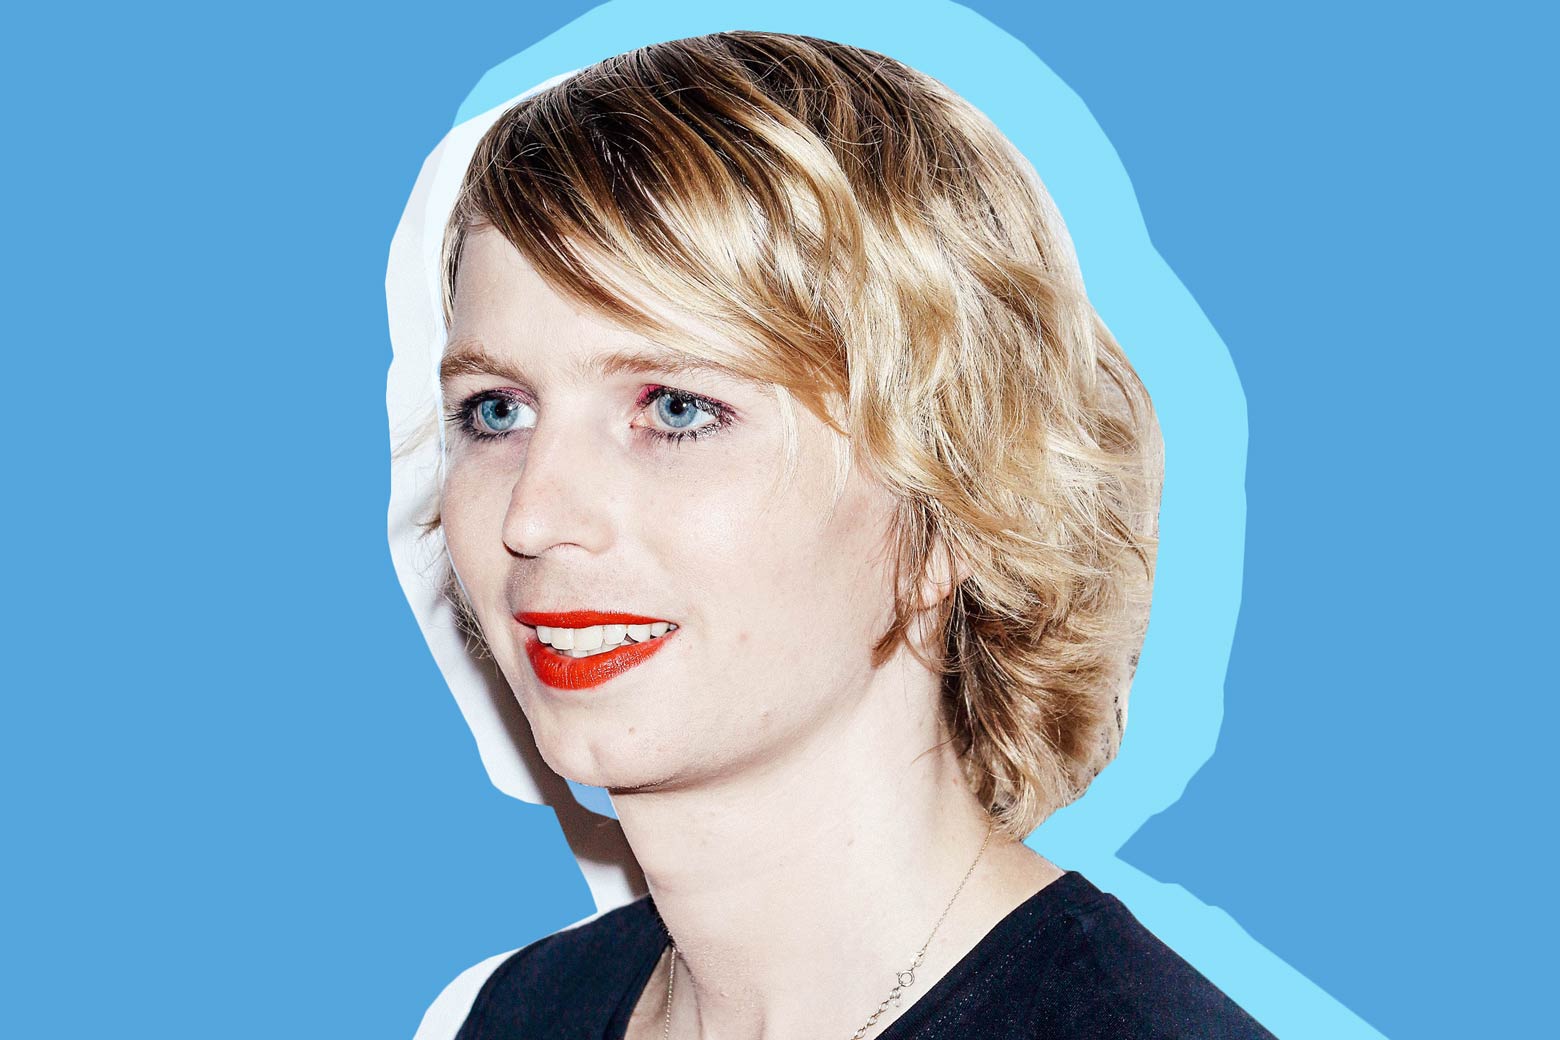 Chelsea Manning attends the Human Flow New York screening on Oct. 9 in New York City.